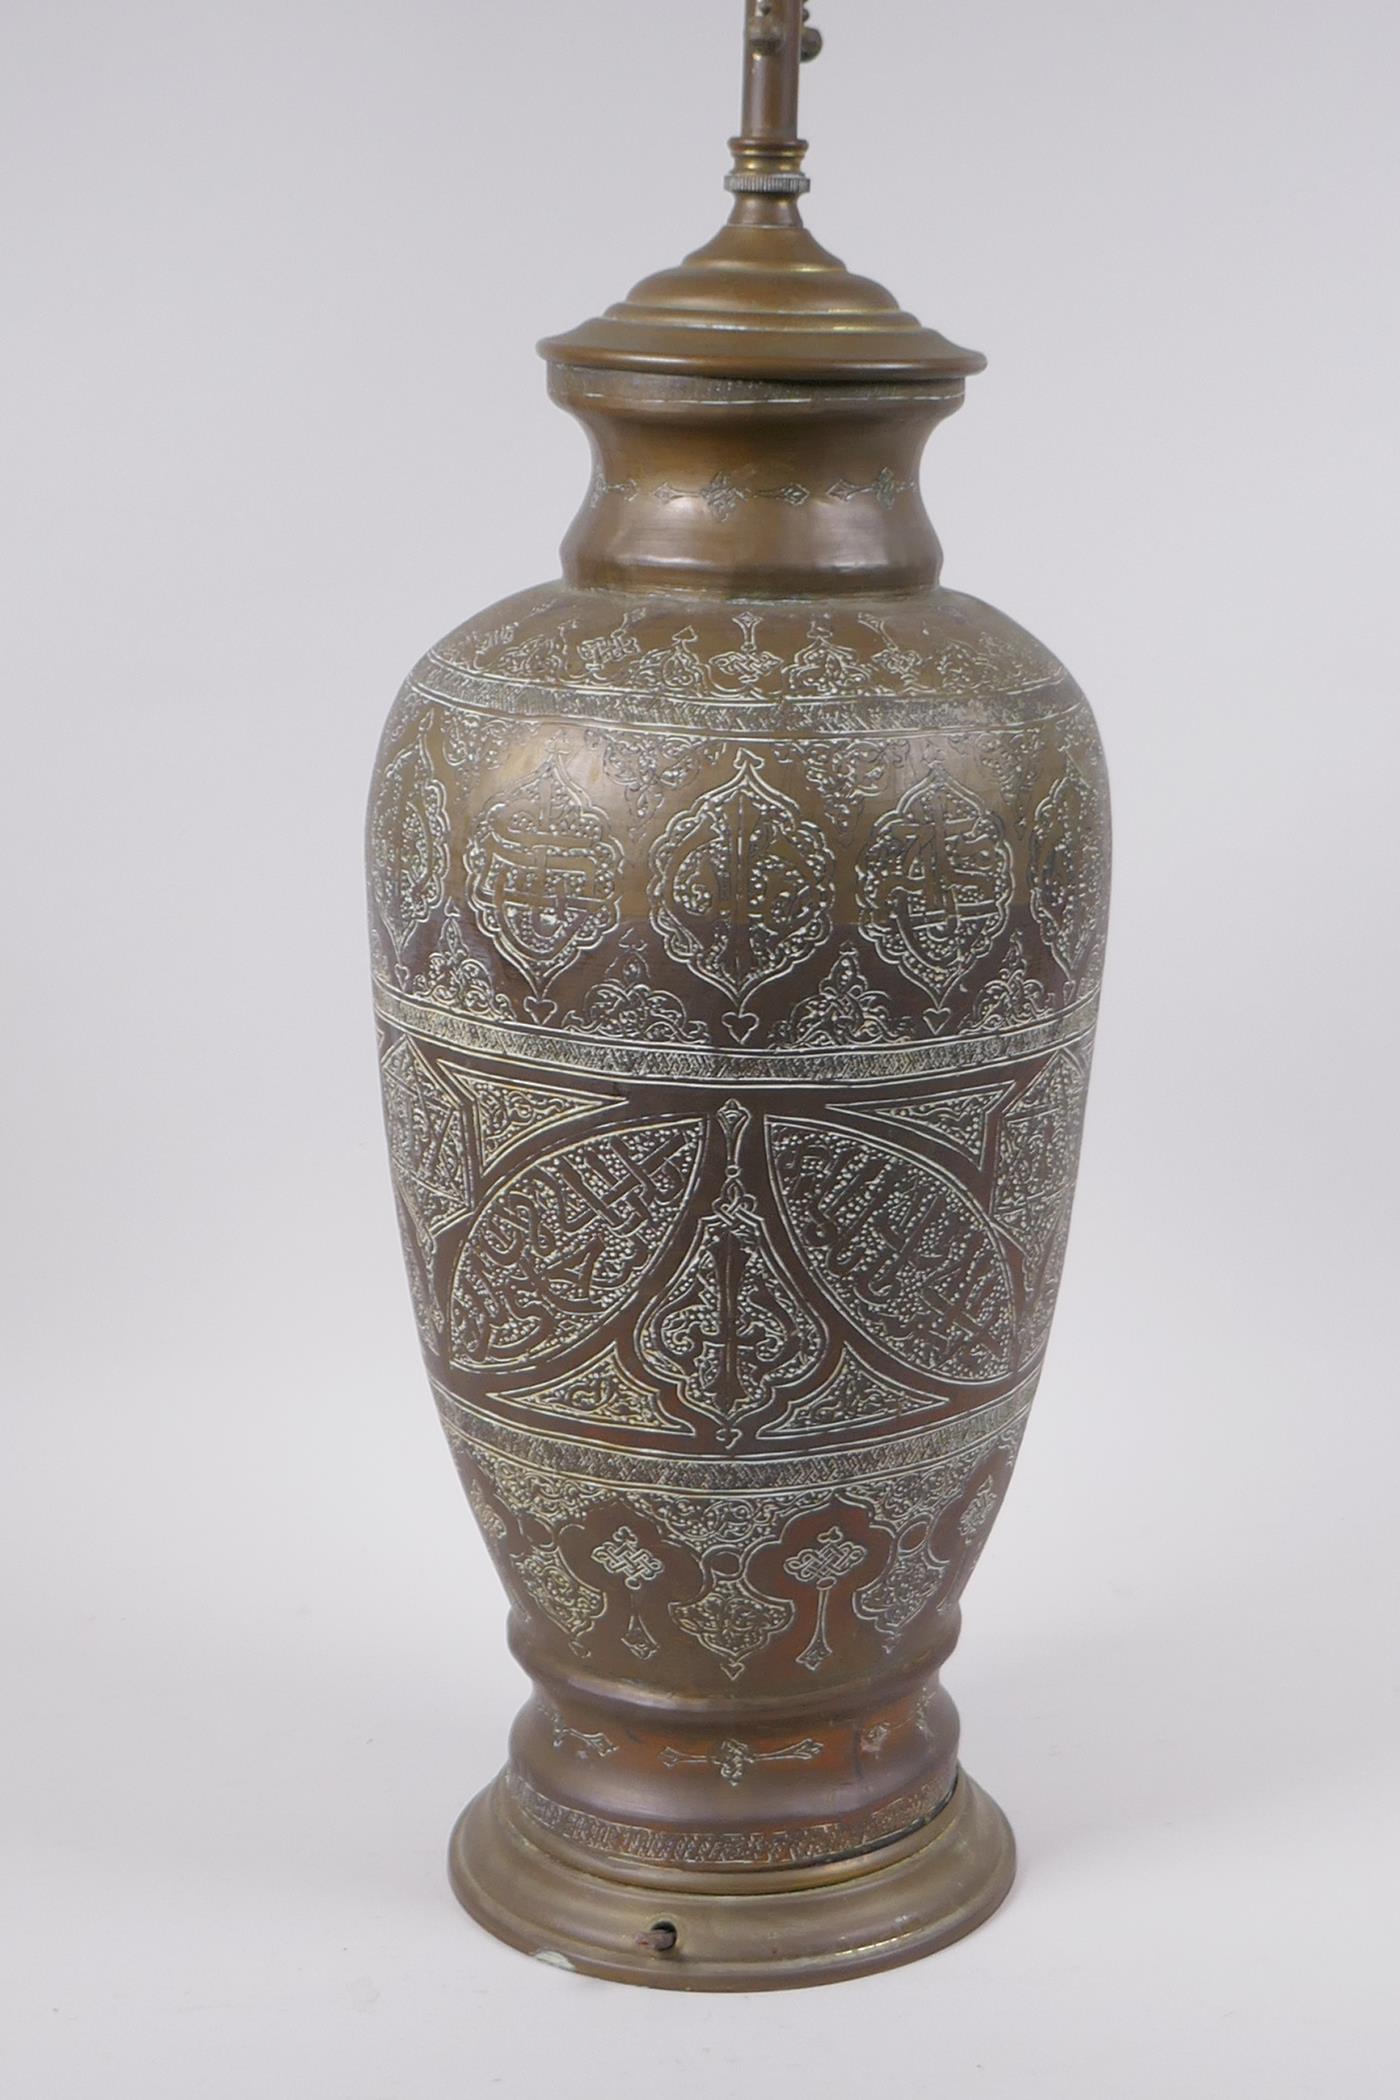 An Islamic brass vase with chased script decoration, converted to a table lamp, 67cm high - Image 3 of 6